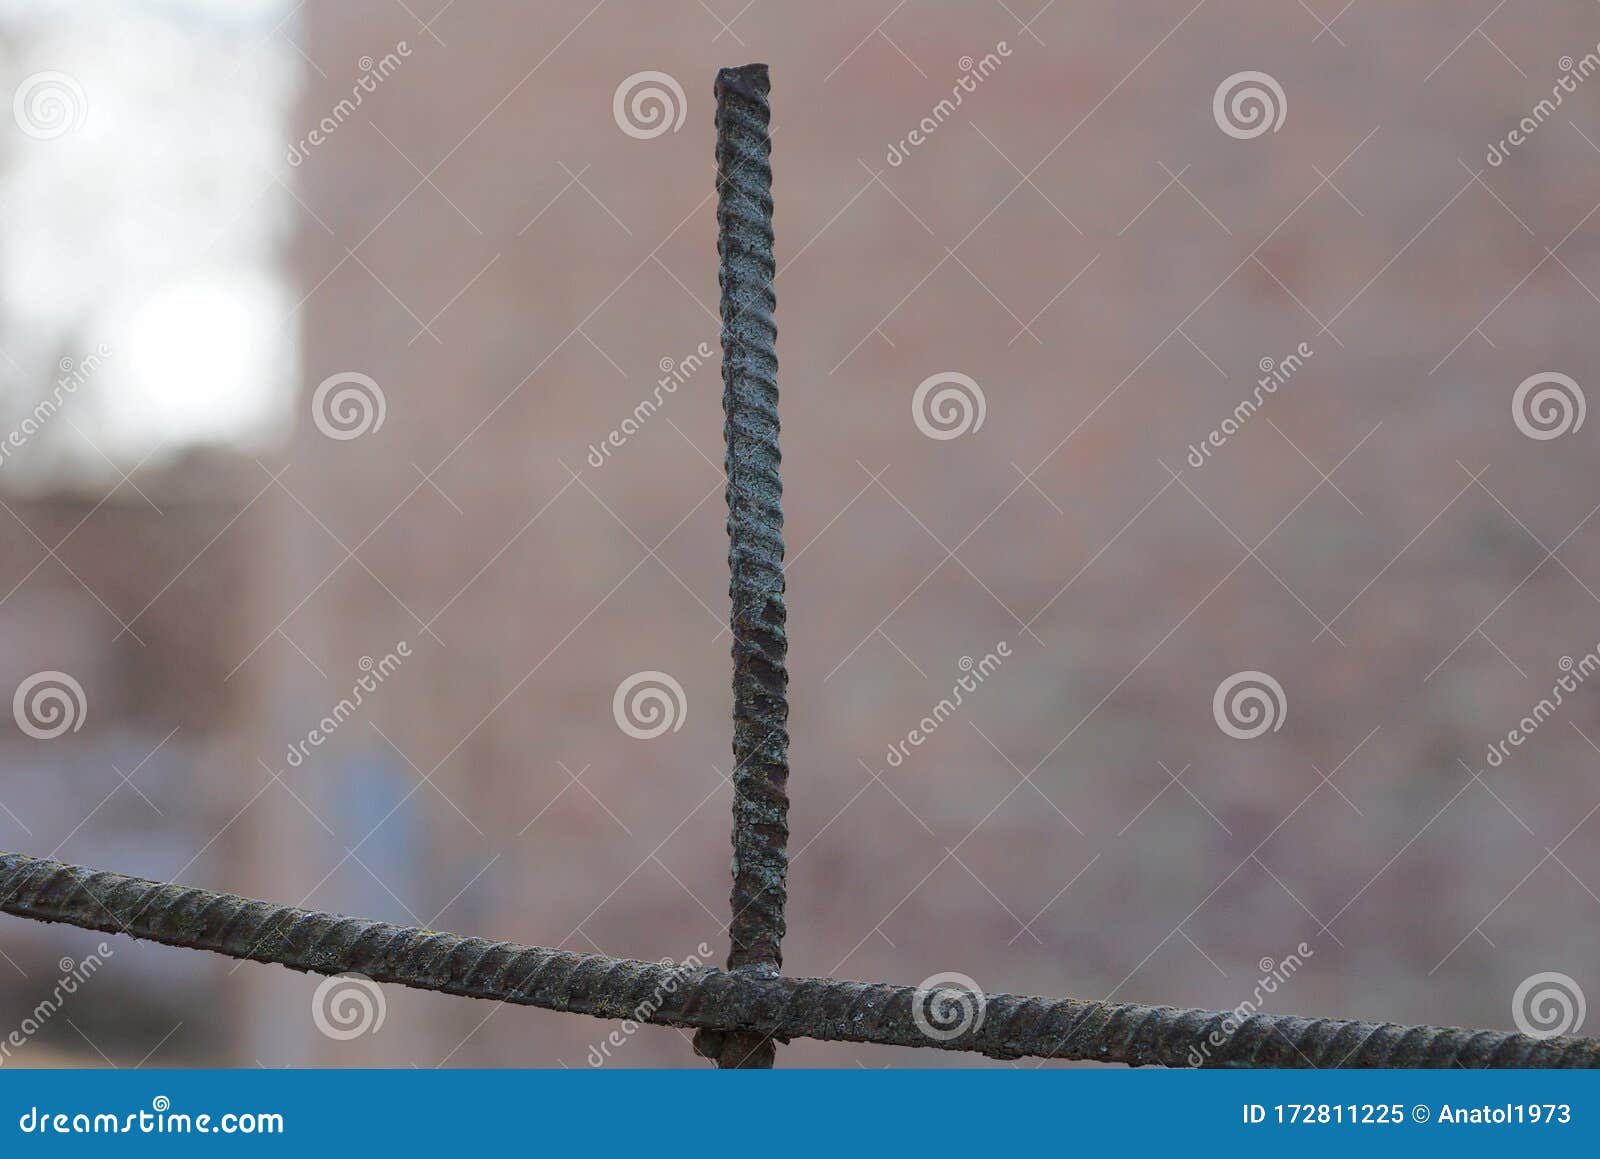 One Long Brown Iron Rod From Rebar In Rust On A Blue Background